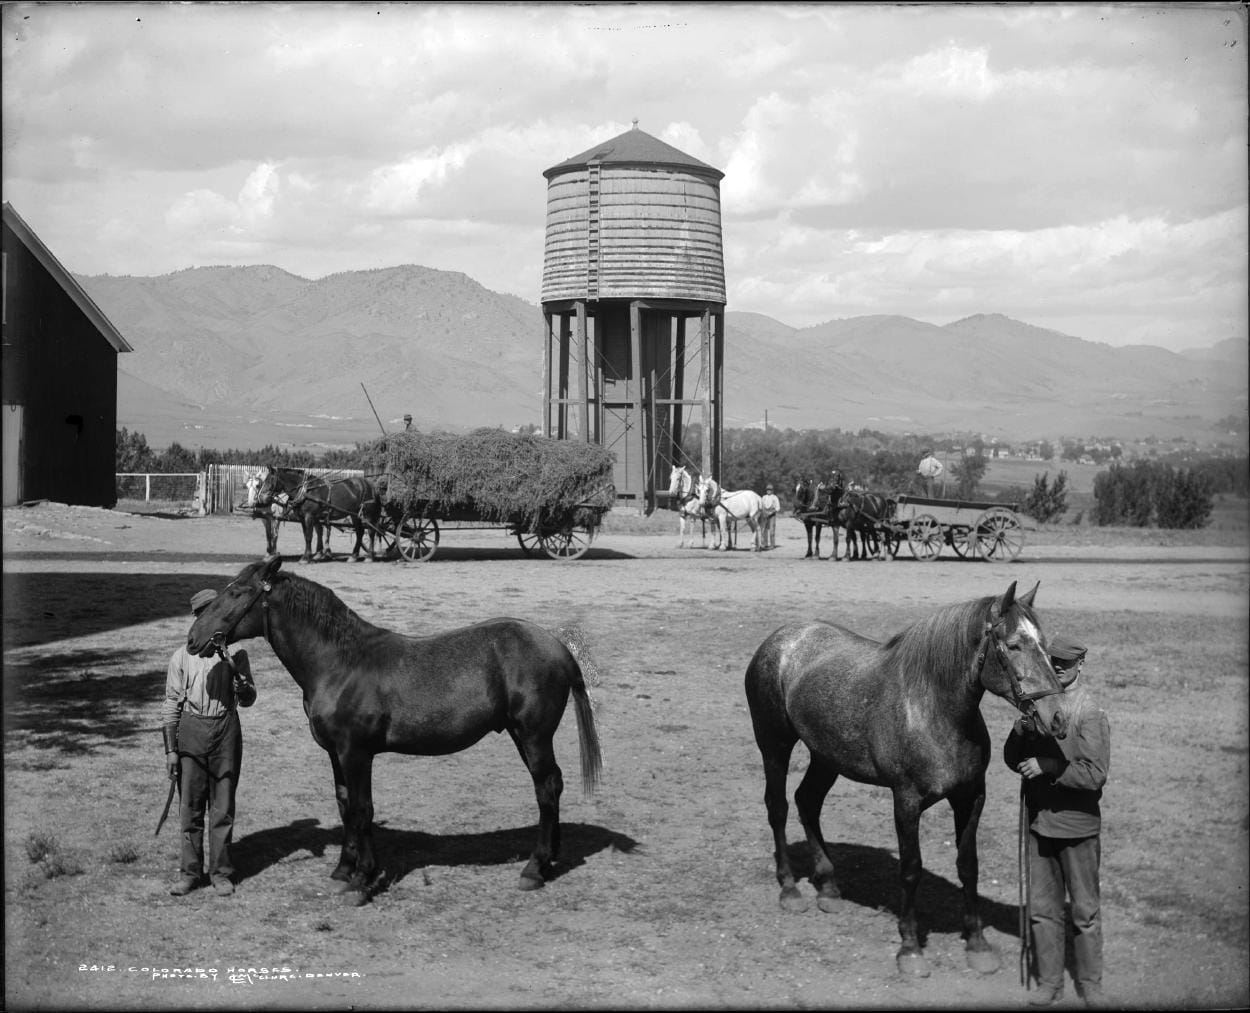 Two boys holding leads of work horses, wagons, draft horses, water tower and mountains in background